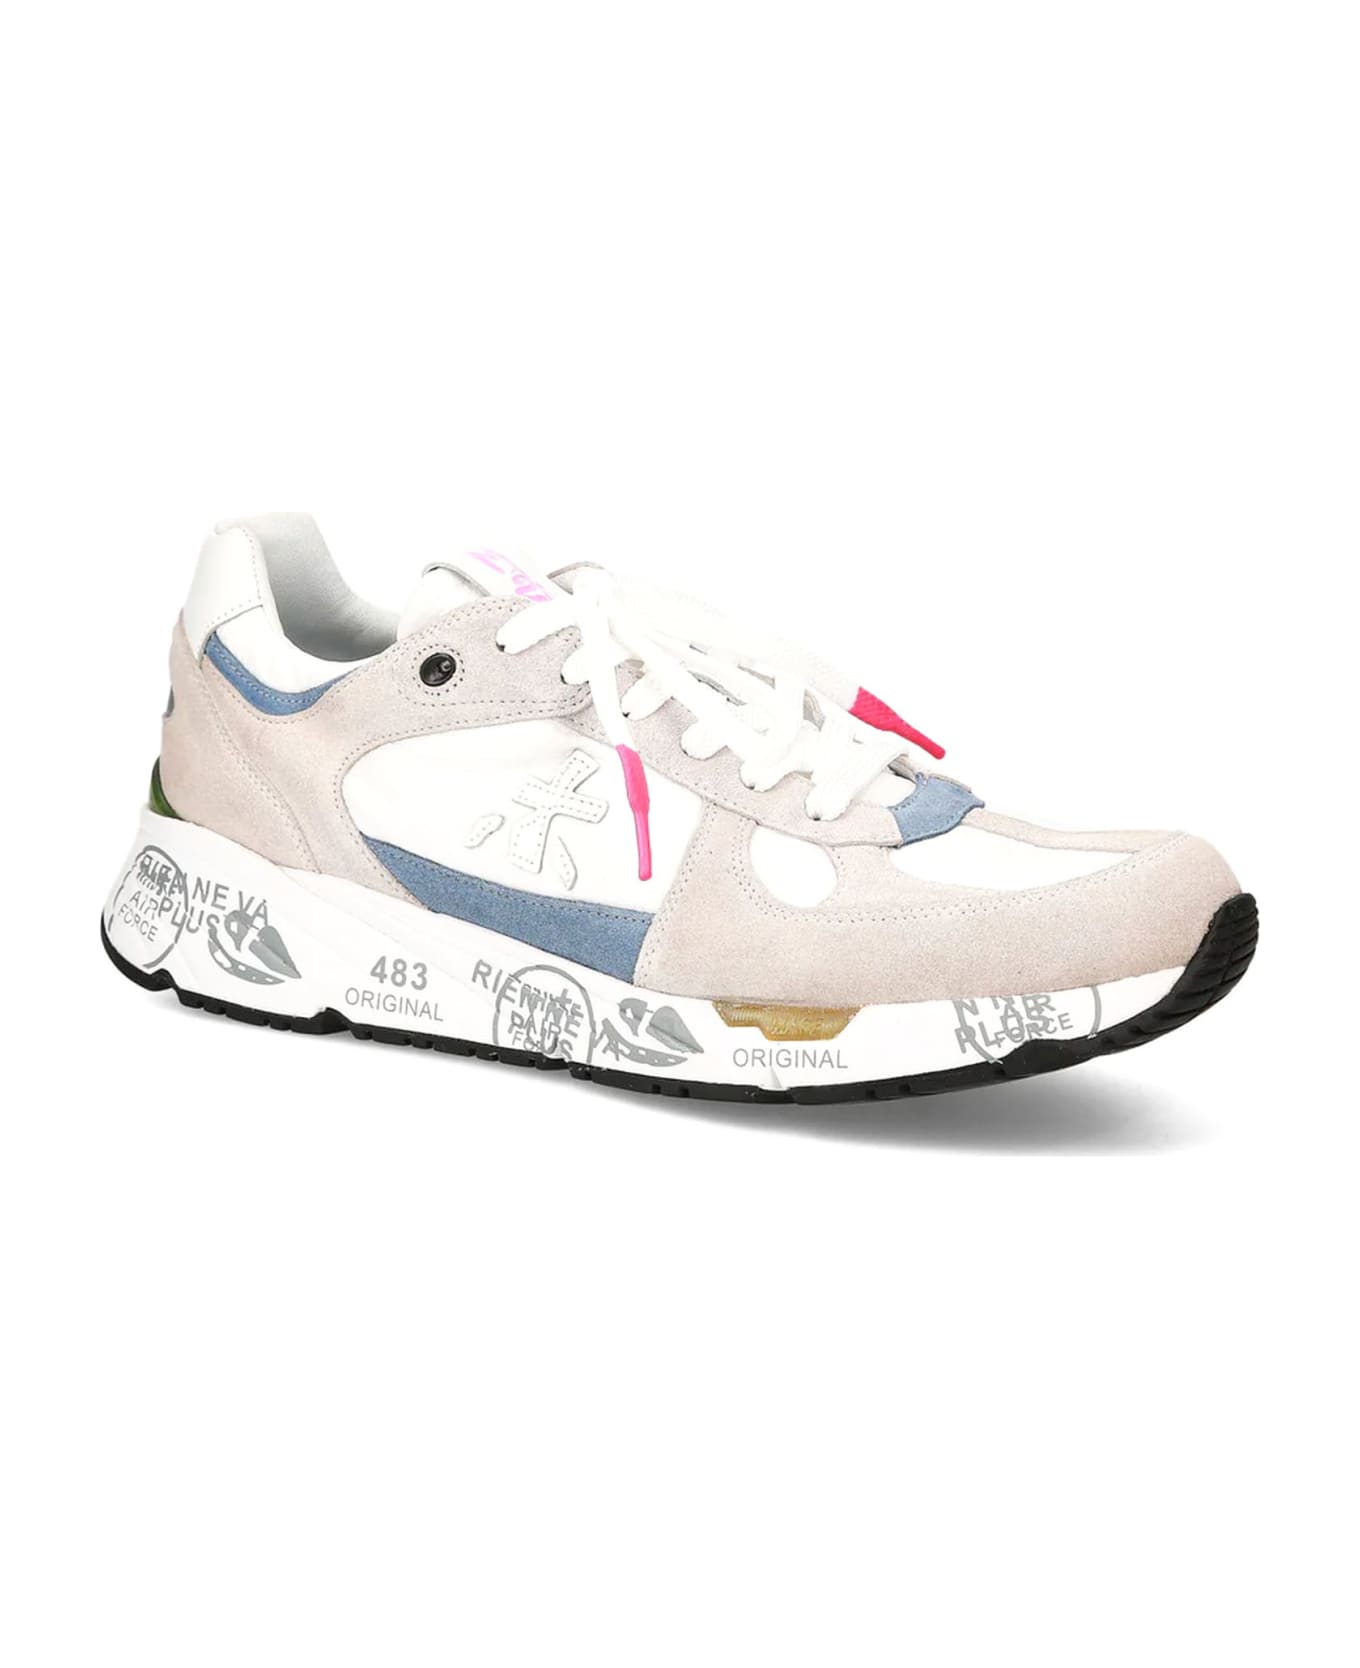 Premiata Mase Sneakers With Contrasting Inserts - Grigio/bianco スニーカー